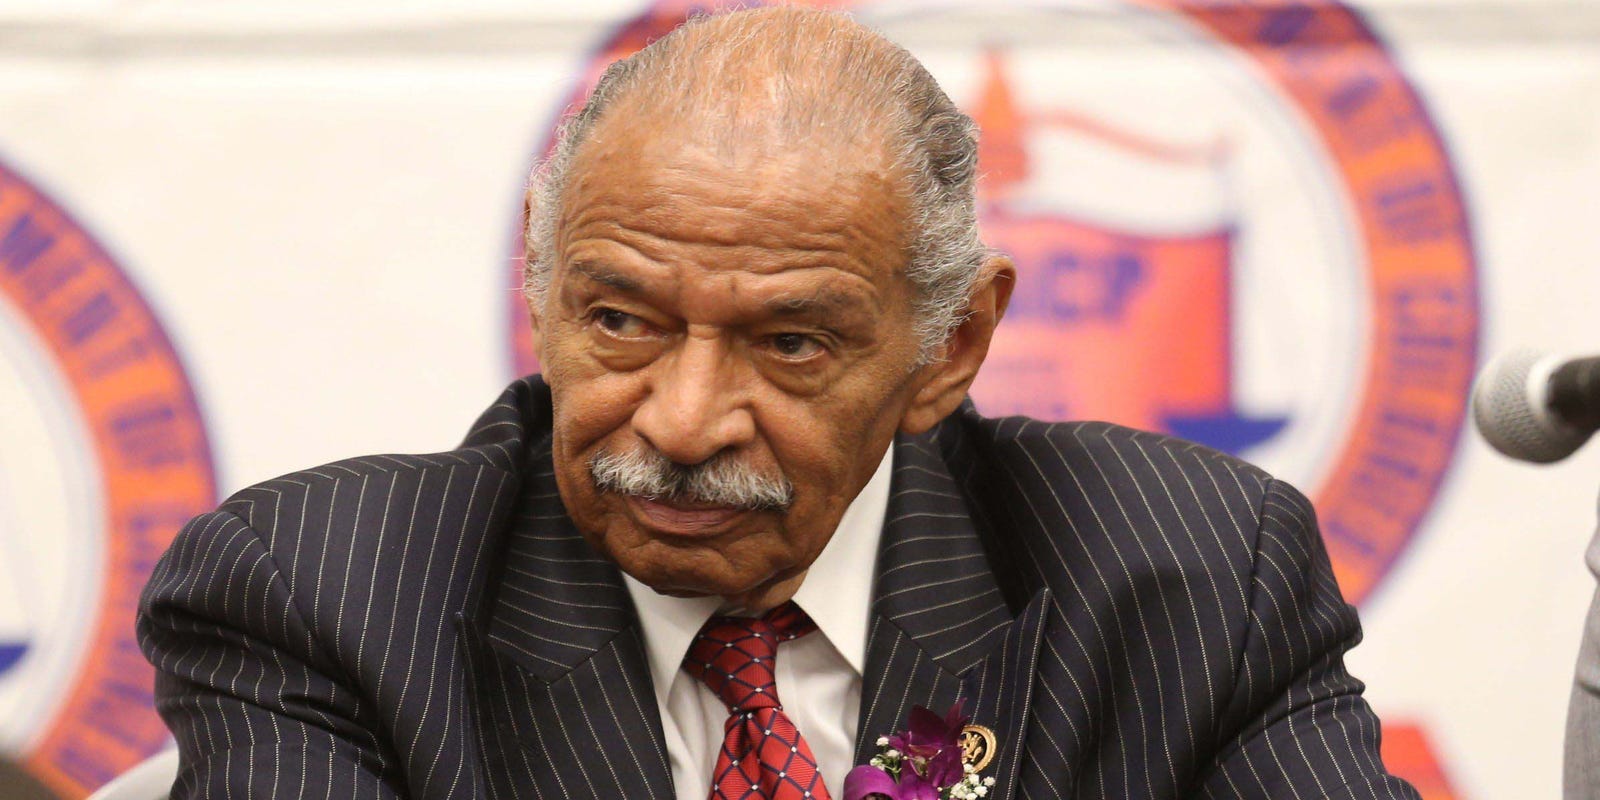 Image result for john conyers congressman